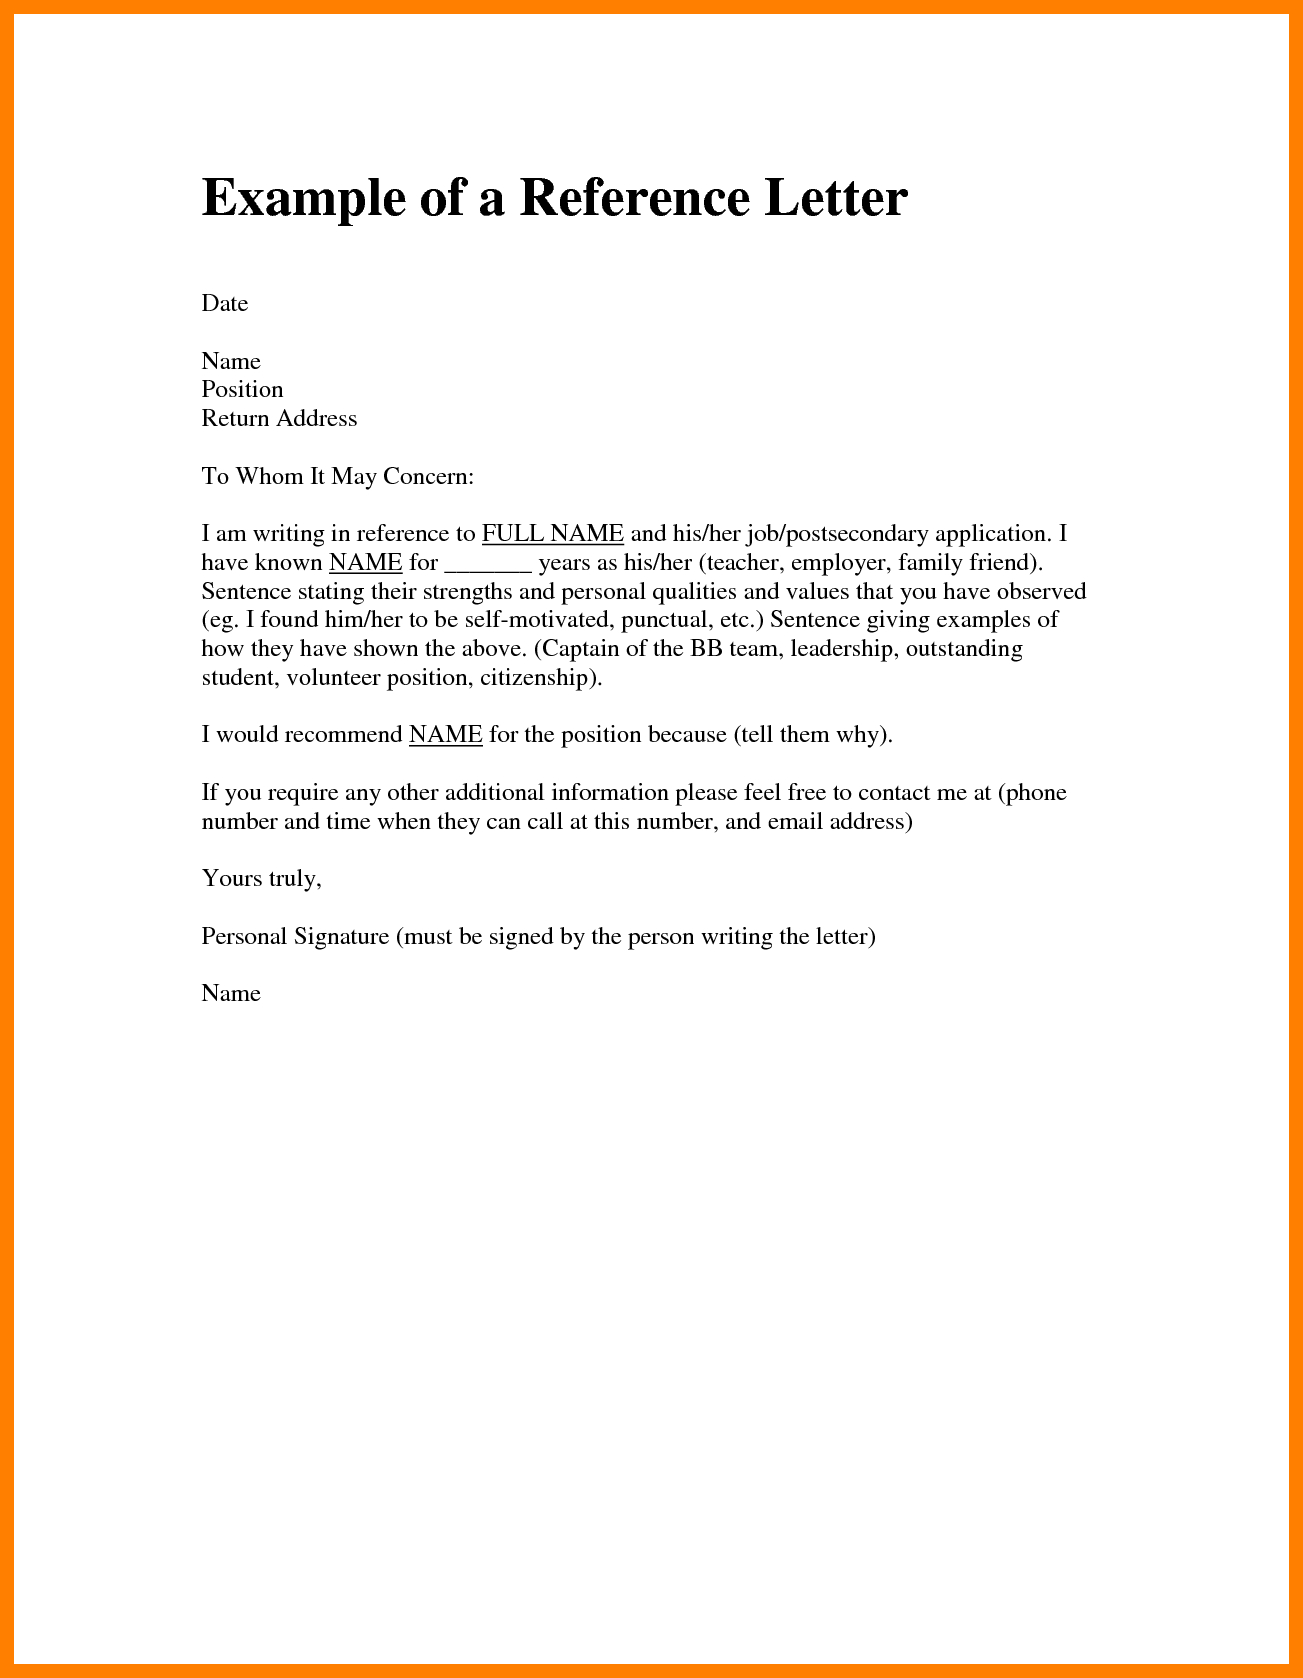 Sample Personal Character Reference Letter For A Friend